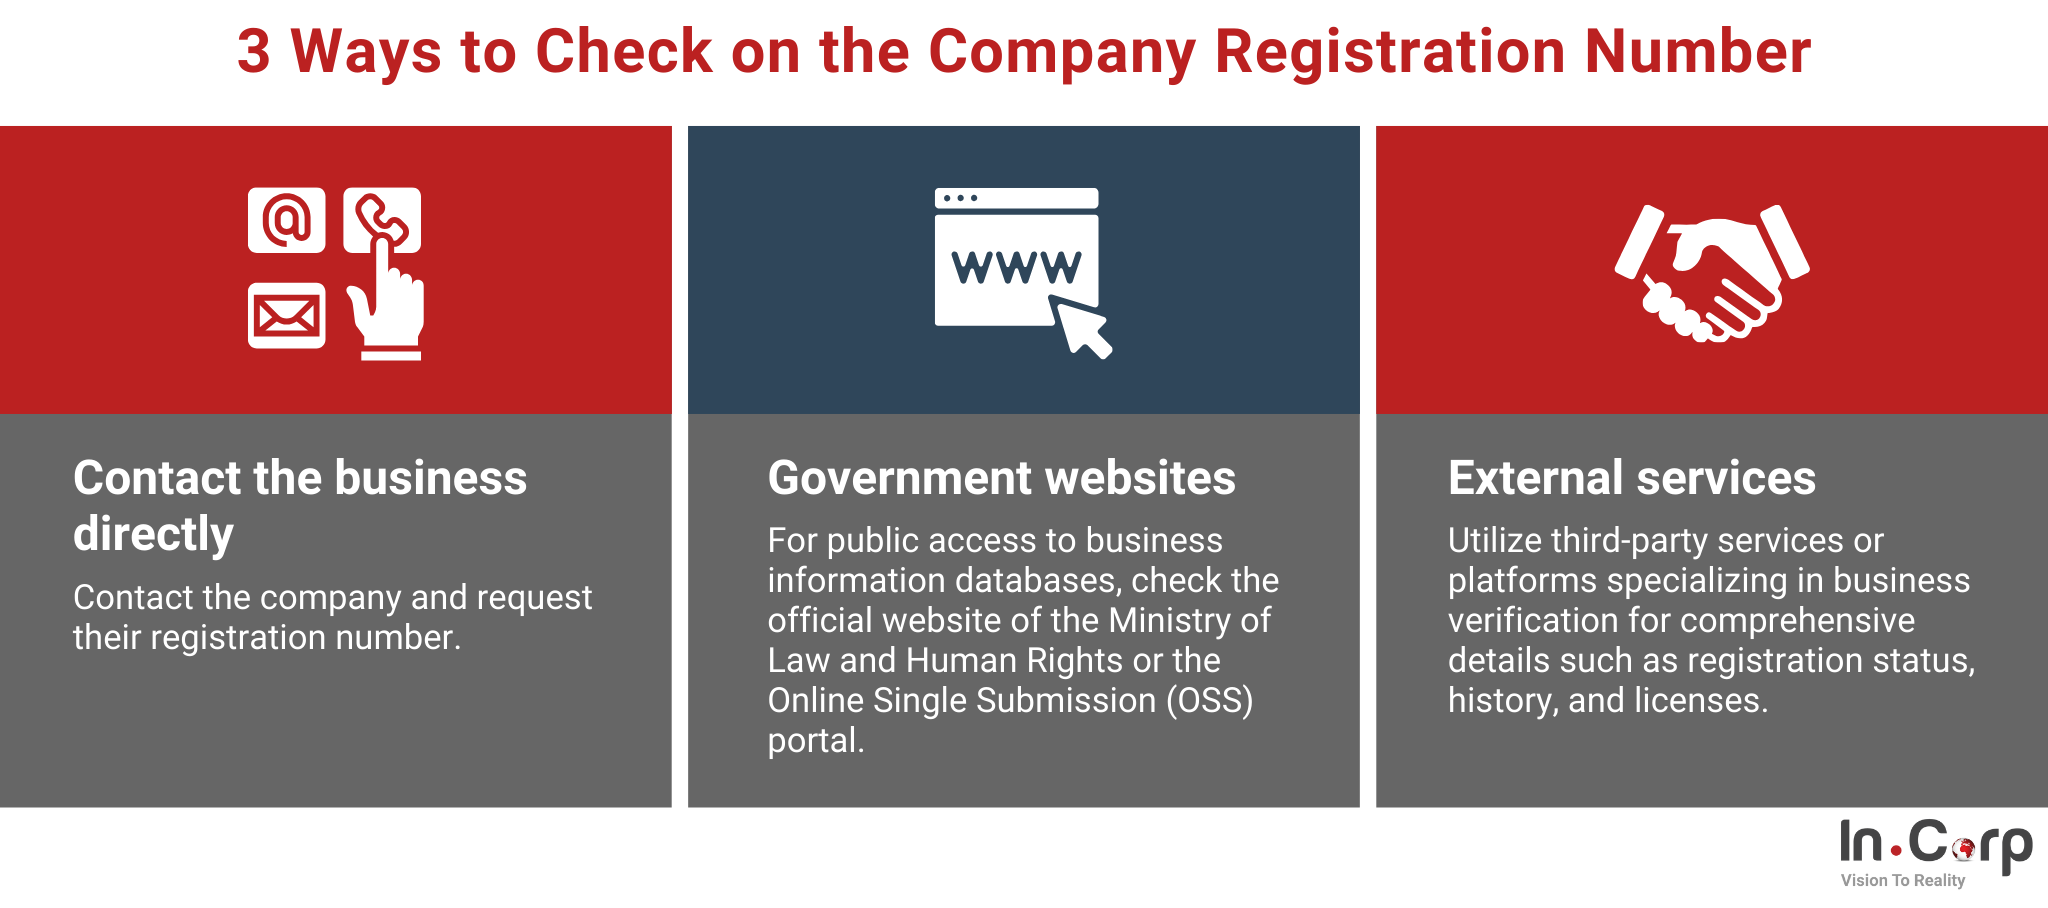 7 benefits of having a company registration number